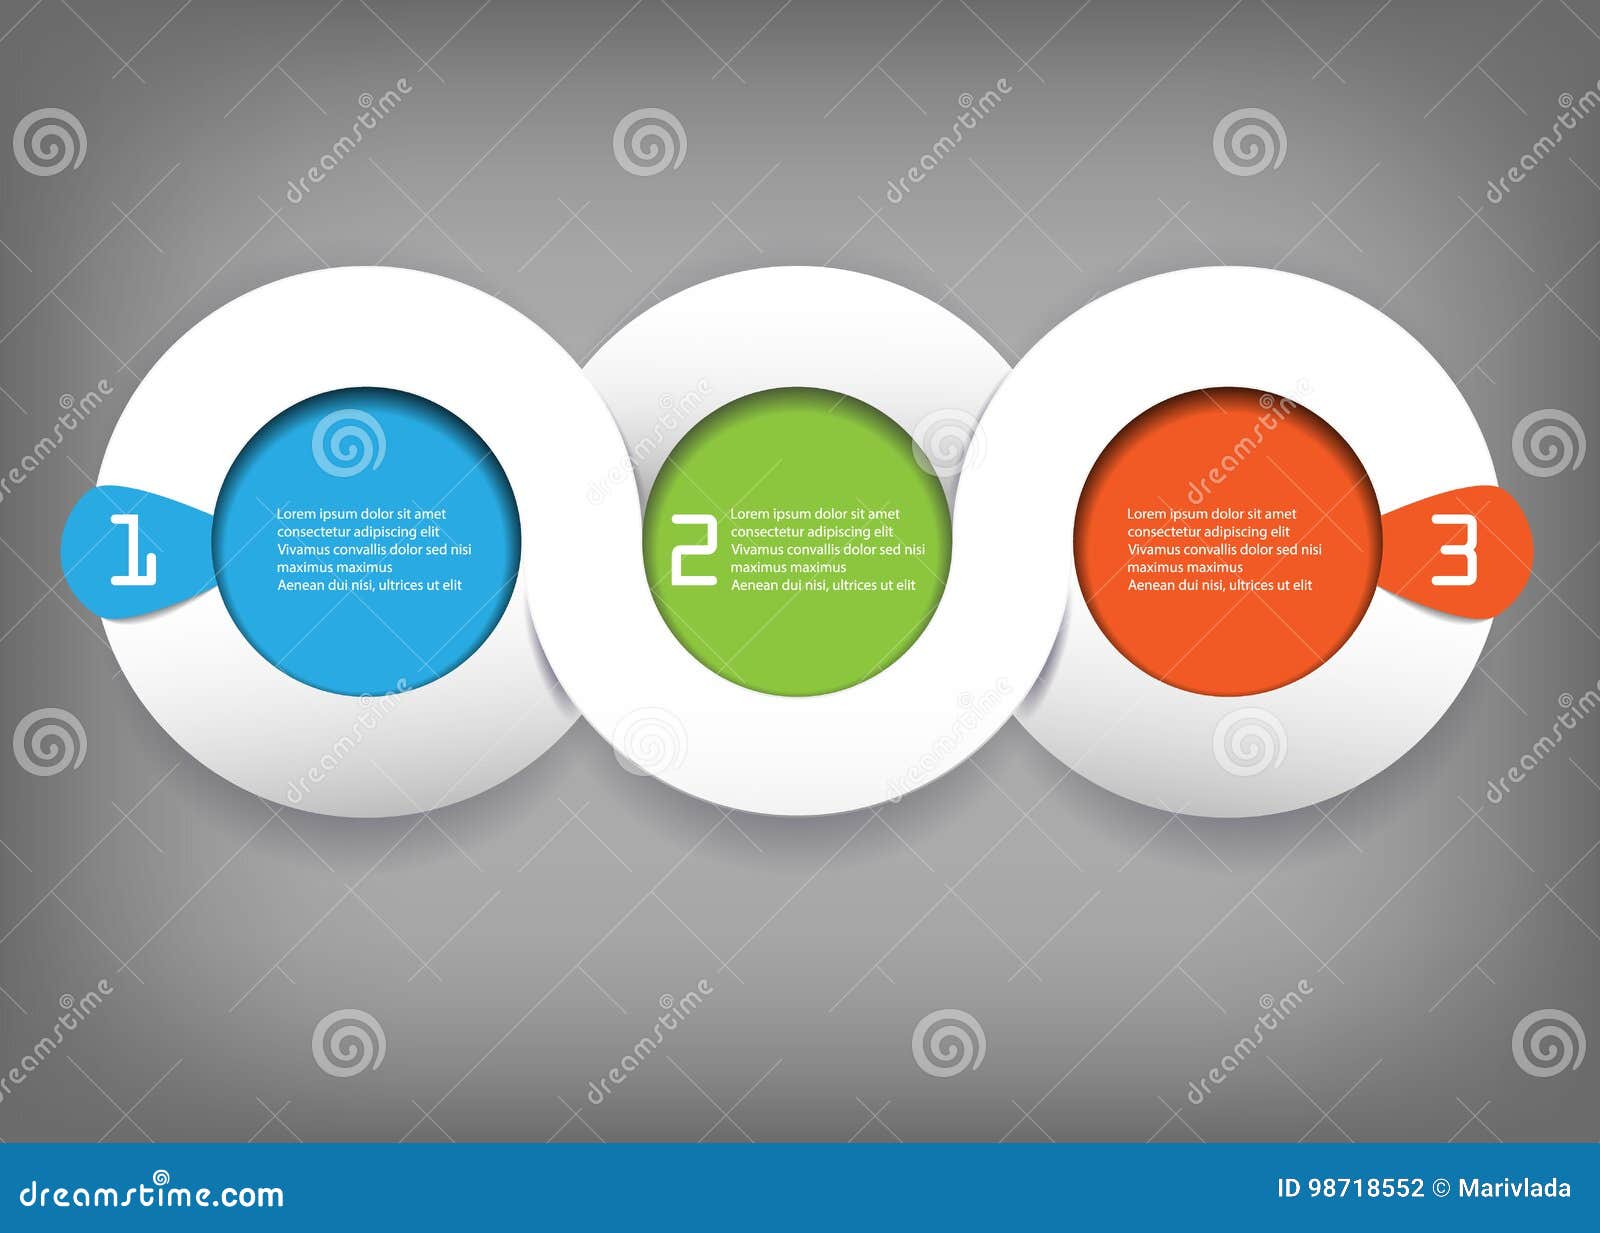 Infographic Vector Round Design Stock Vector - Illustration of announce ...